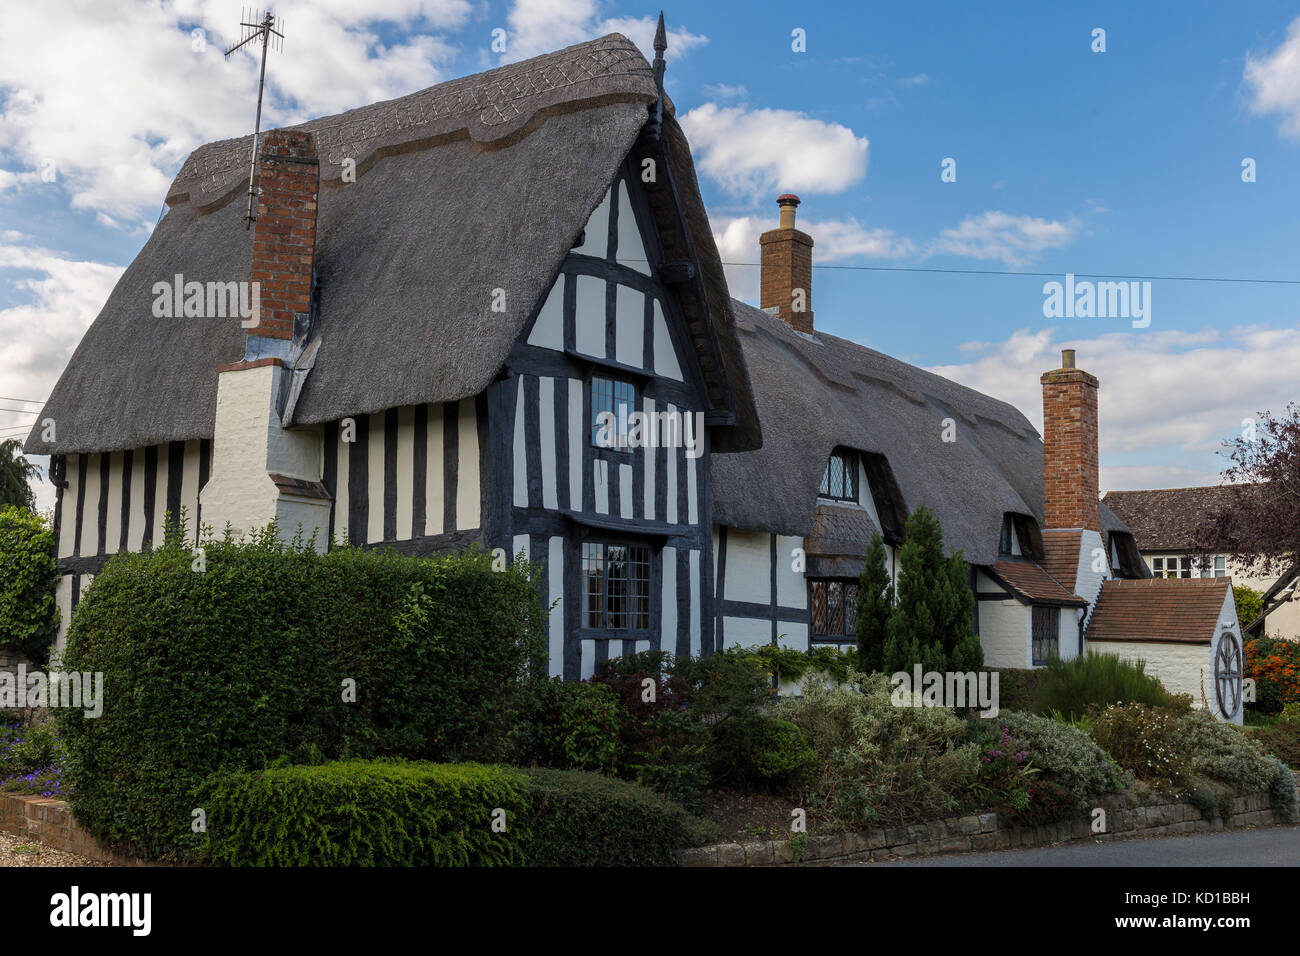 Black and white timber framed cottage with thatch roof Stock Photo